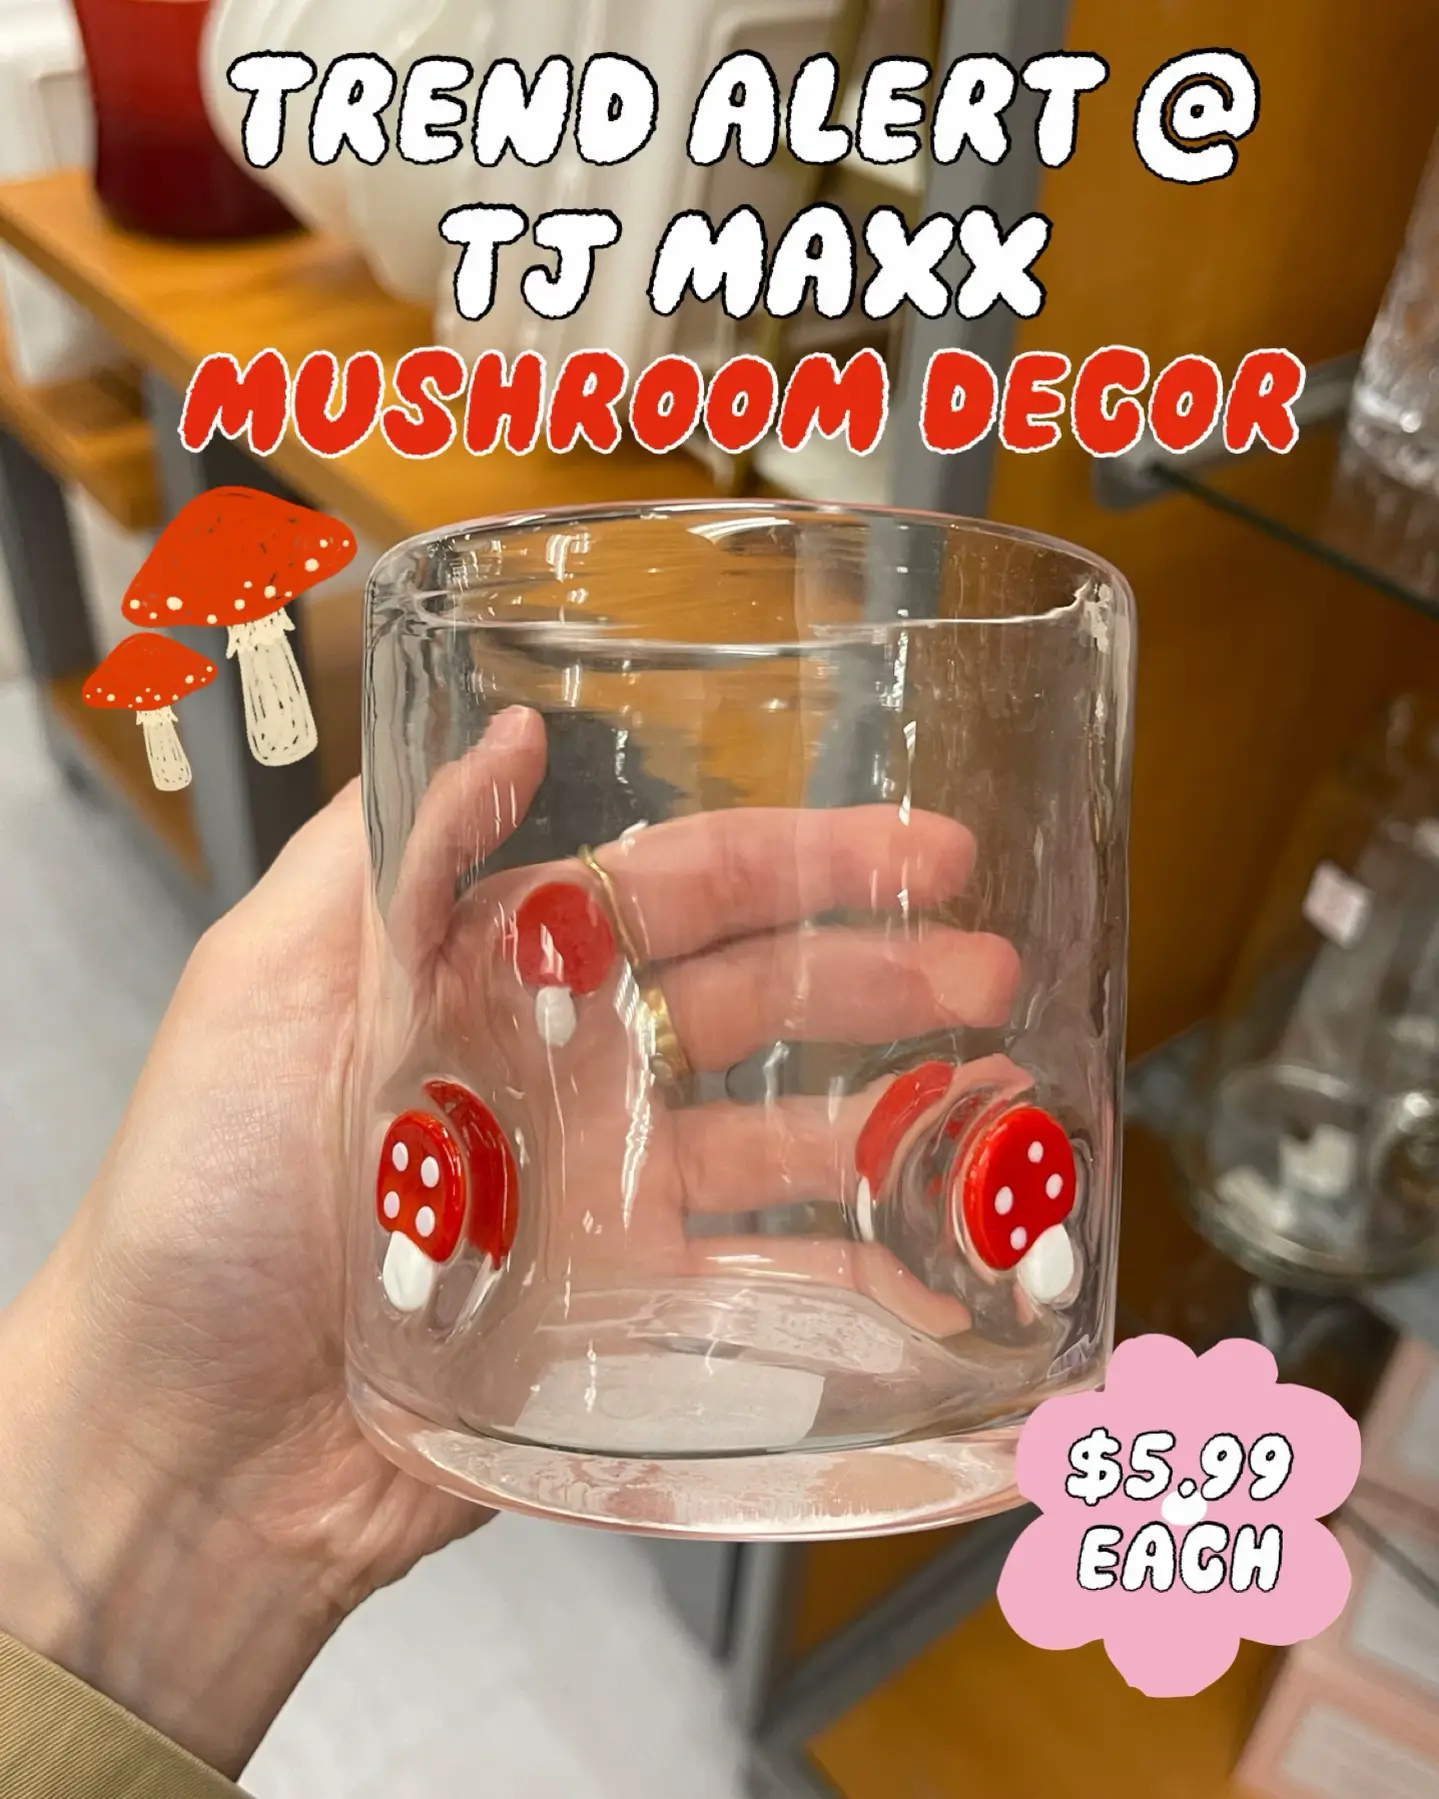 Mushroom Cups Are Taking Over as the Latest Glassware Trend